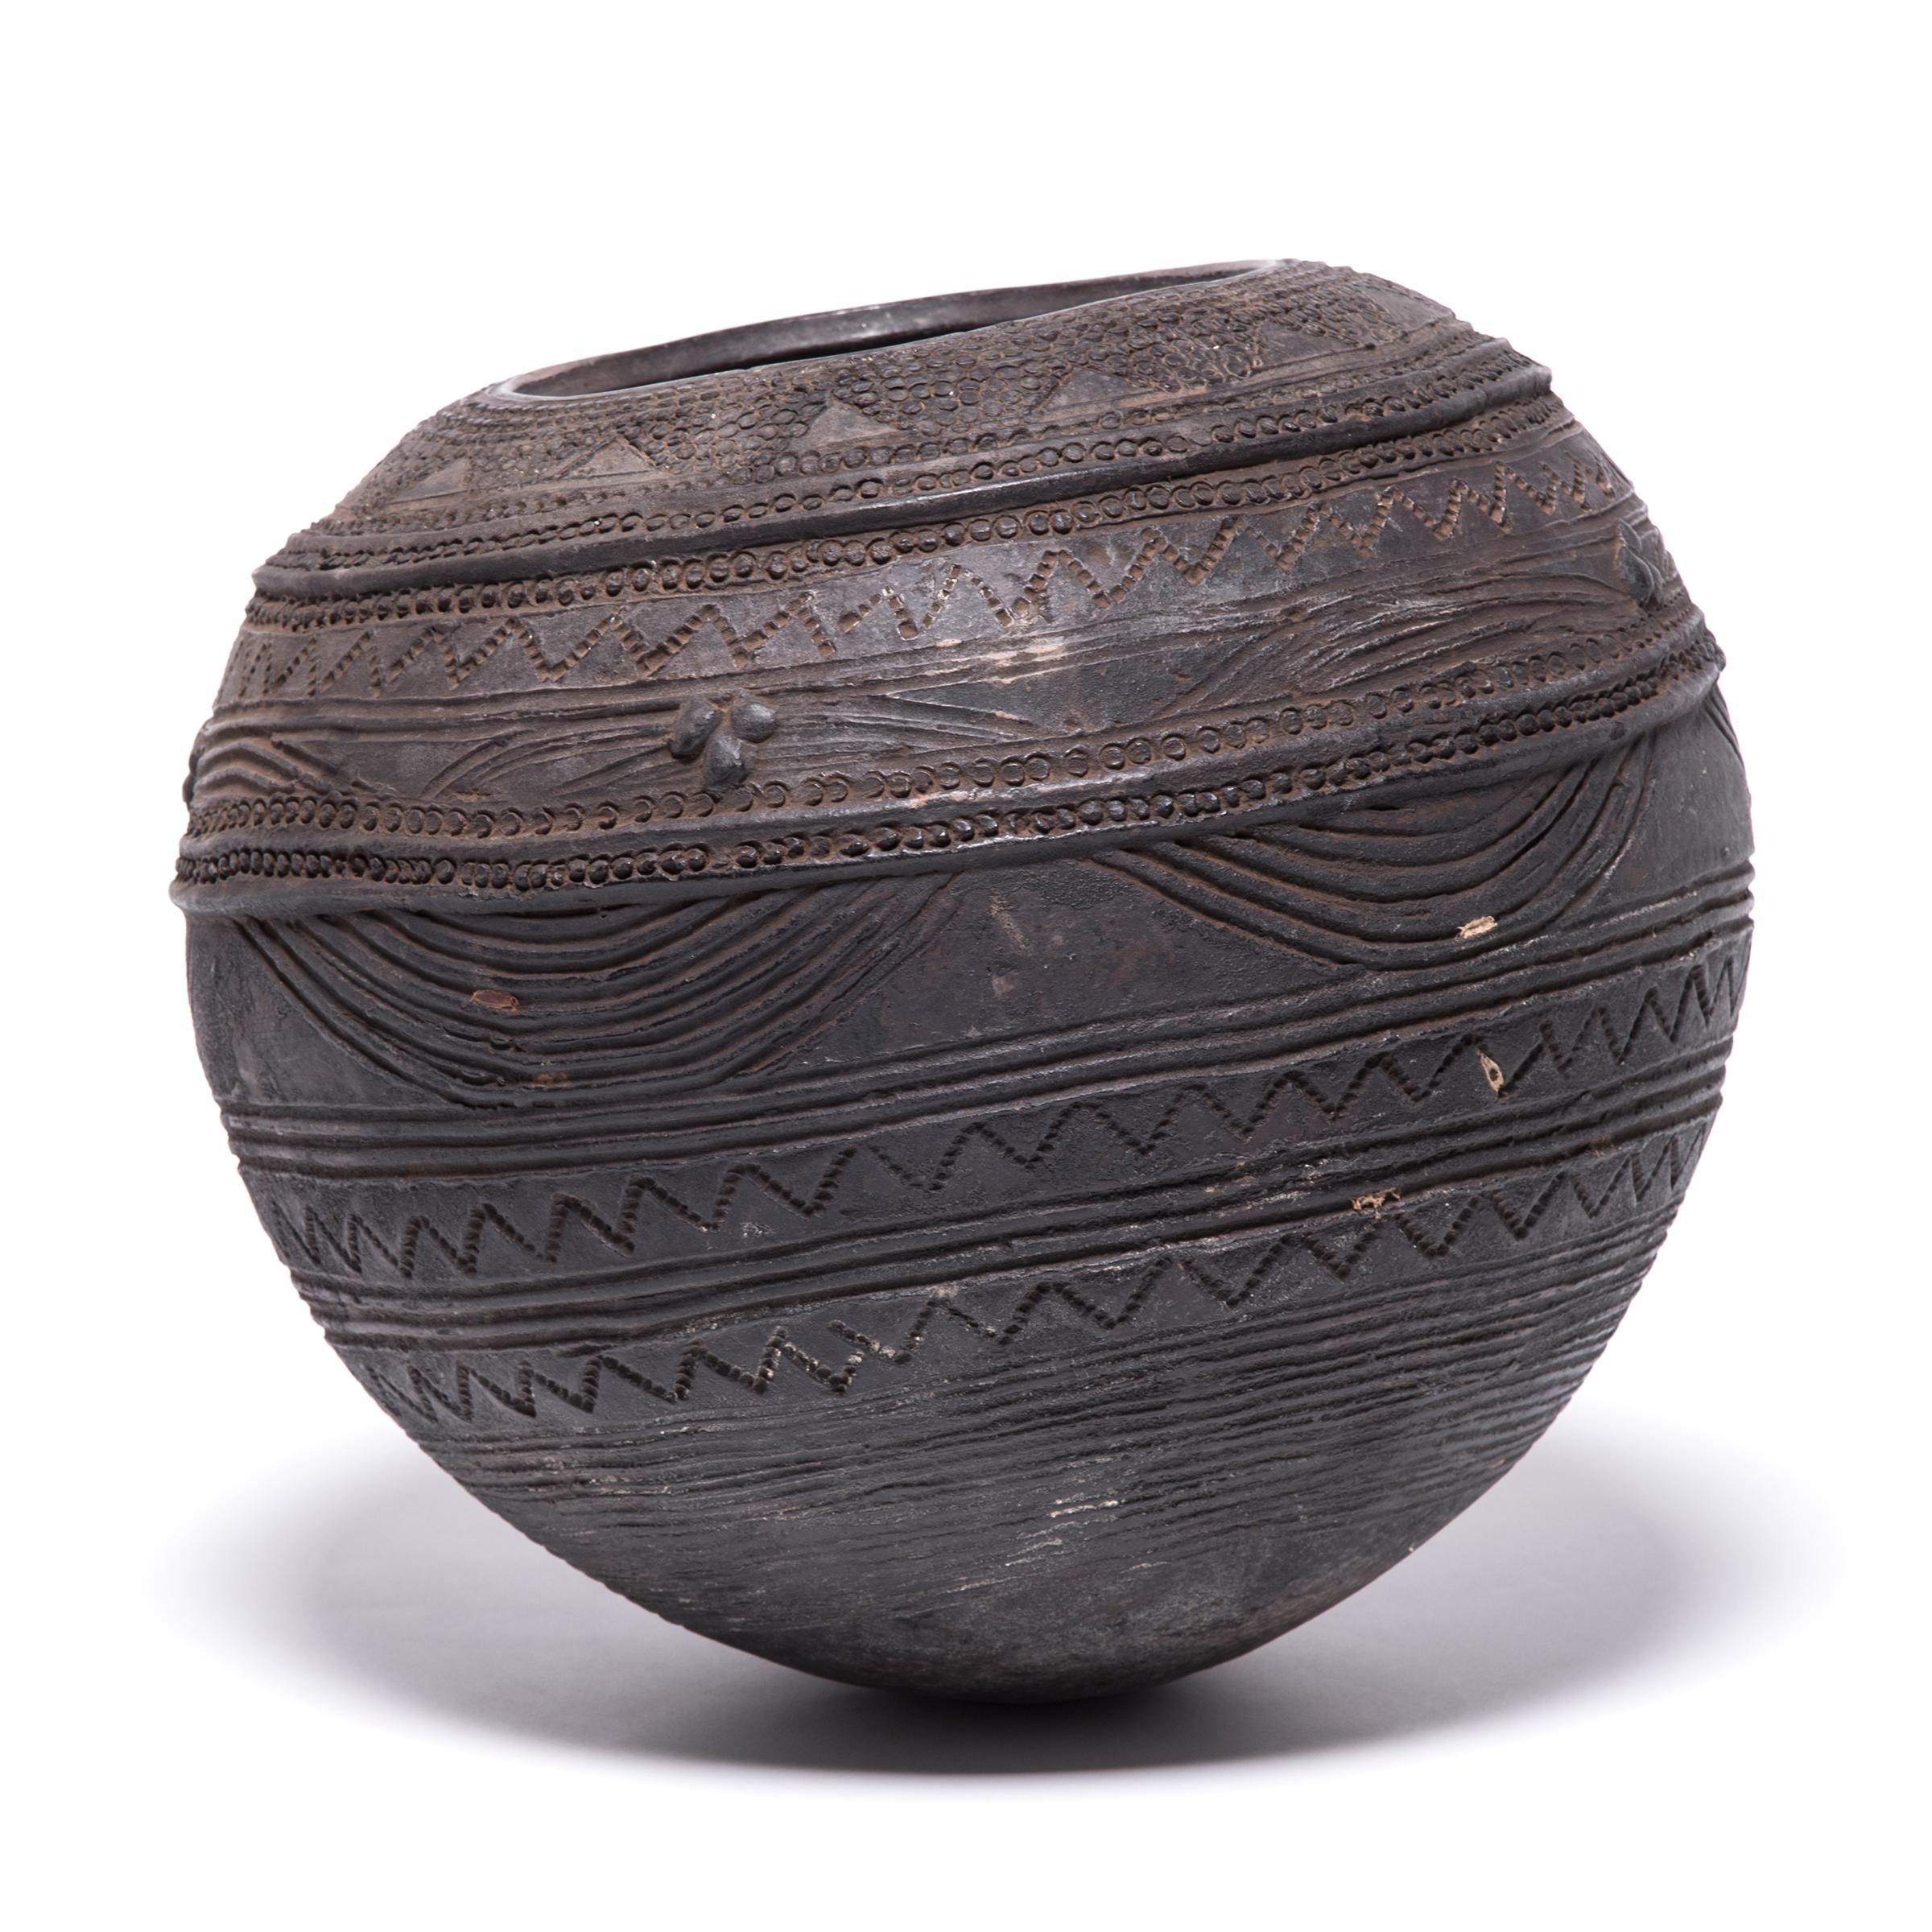 The Nupe people of Nigeria were touted as some of the finest ceramicists in Africa. This water vessel is a particularly fine example of their mastery. While most such items feature a small number of designs, the intricately interwoven bands, ridges,